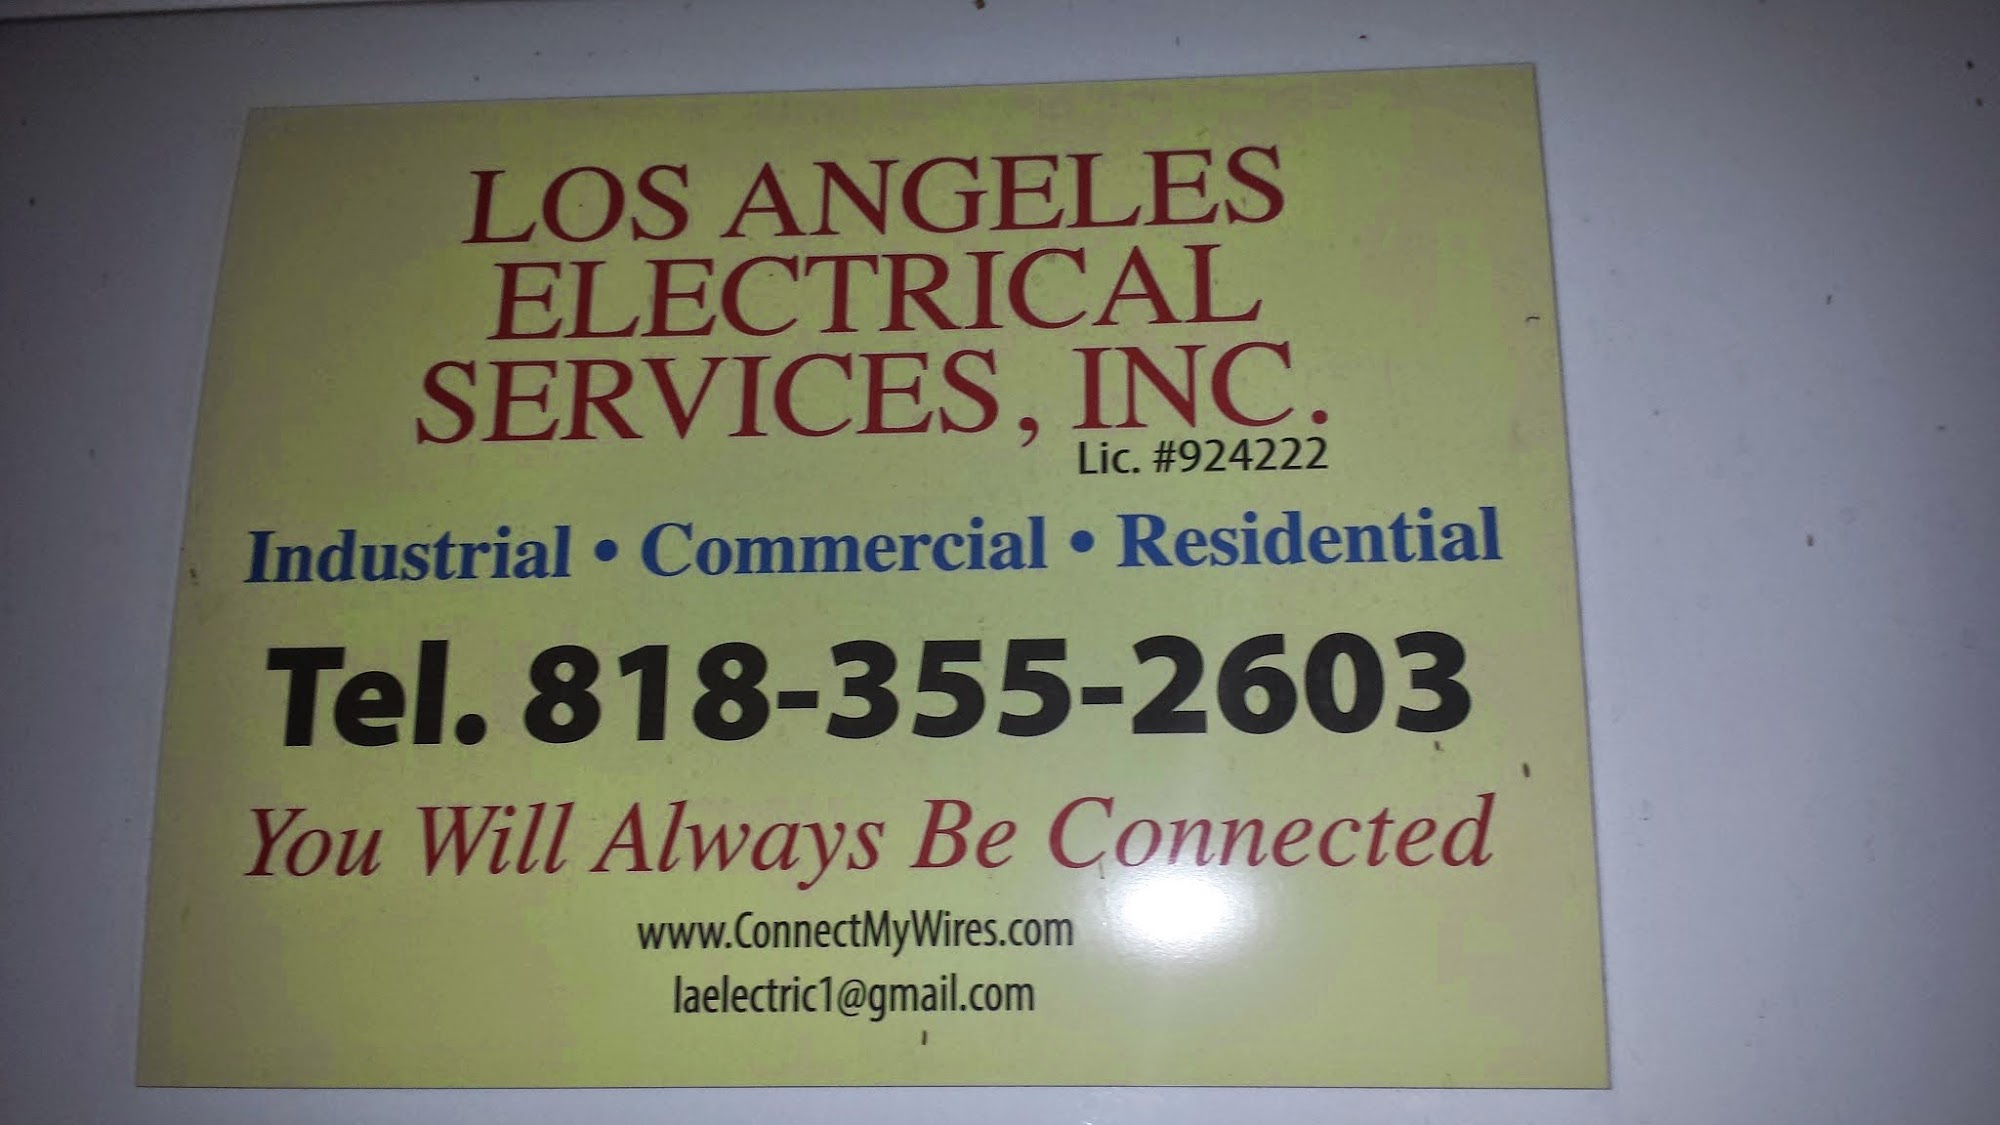 Los Angeles Electrical Services